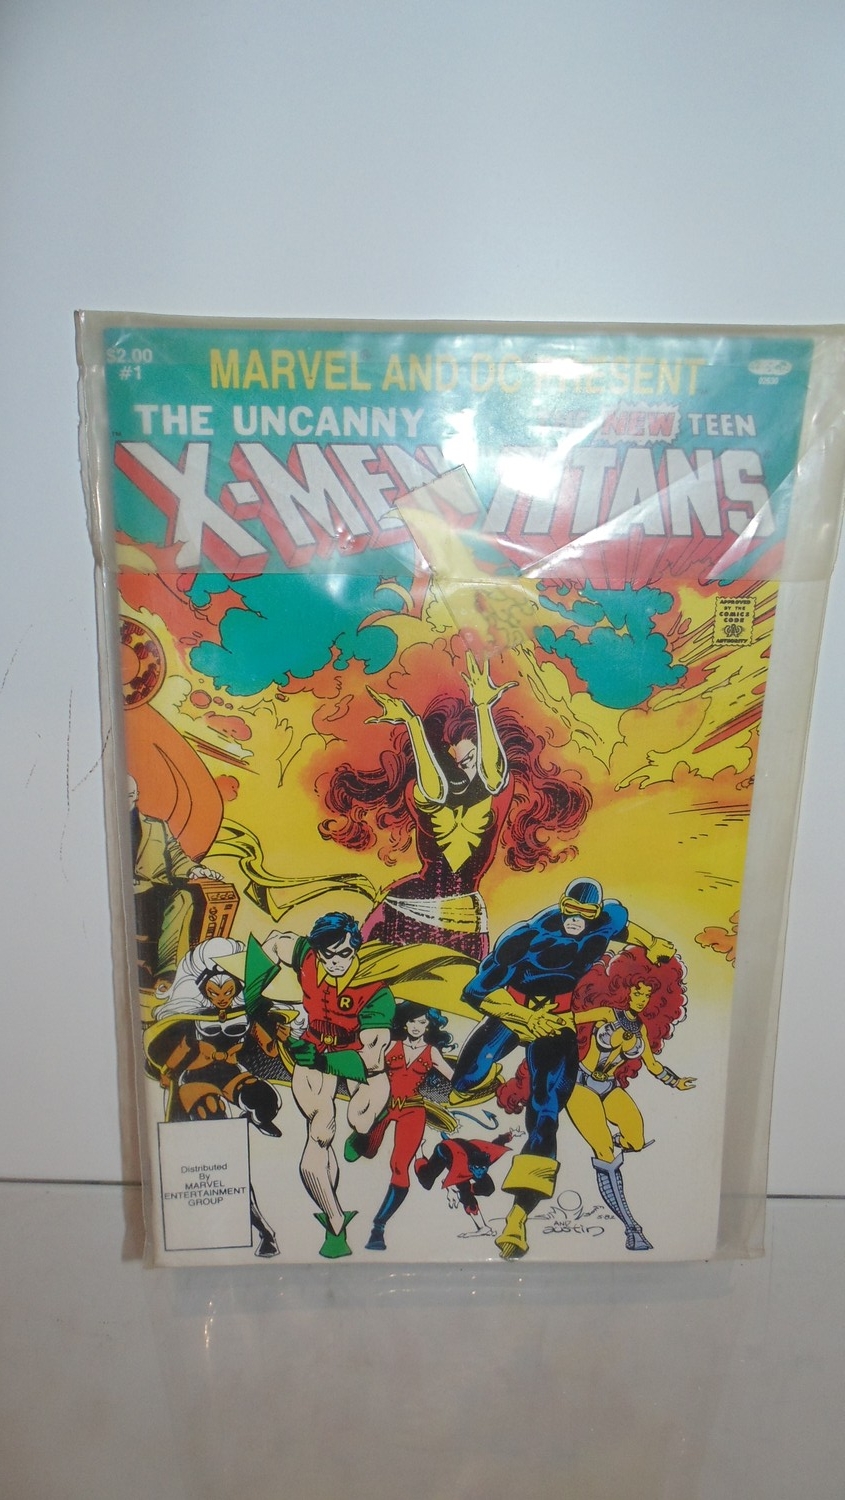 X-Men and the Titans, First edition comic.